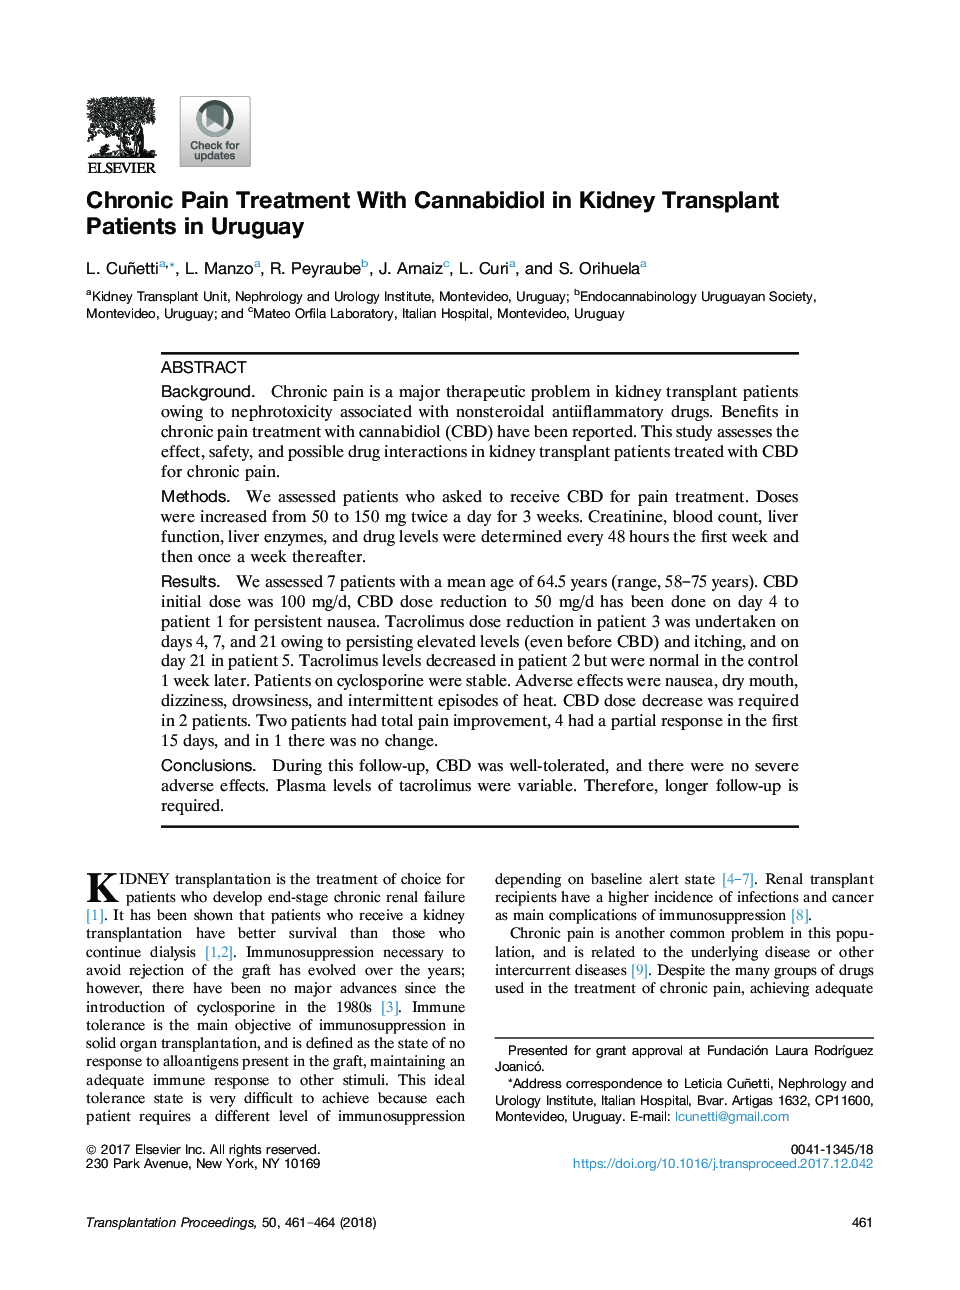 Chronic Pain Treatment With Cannabidiol in Kidney Transplant Patients in Uruguay